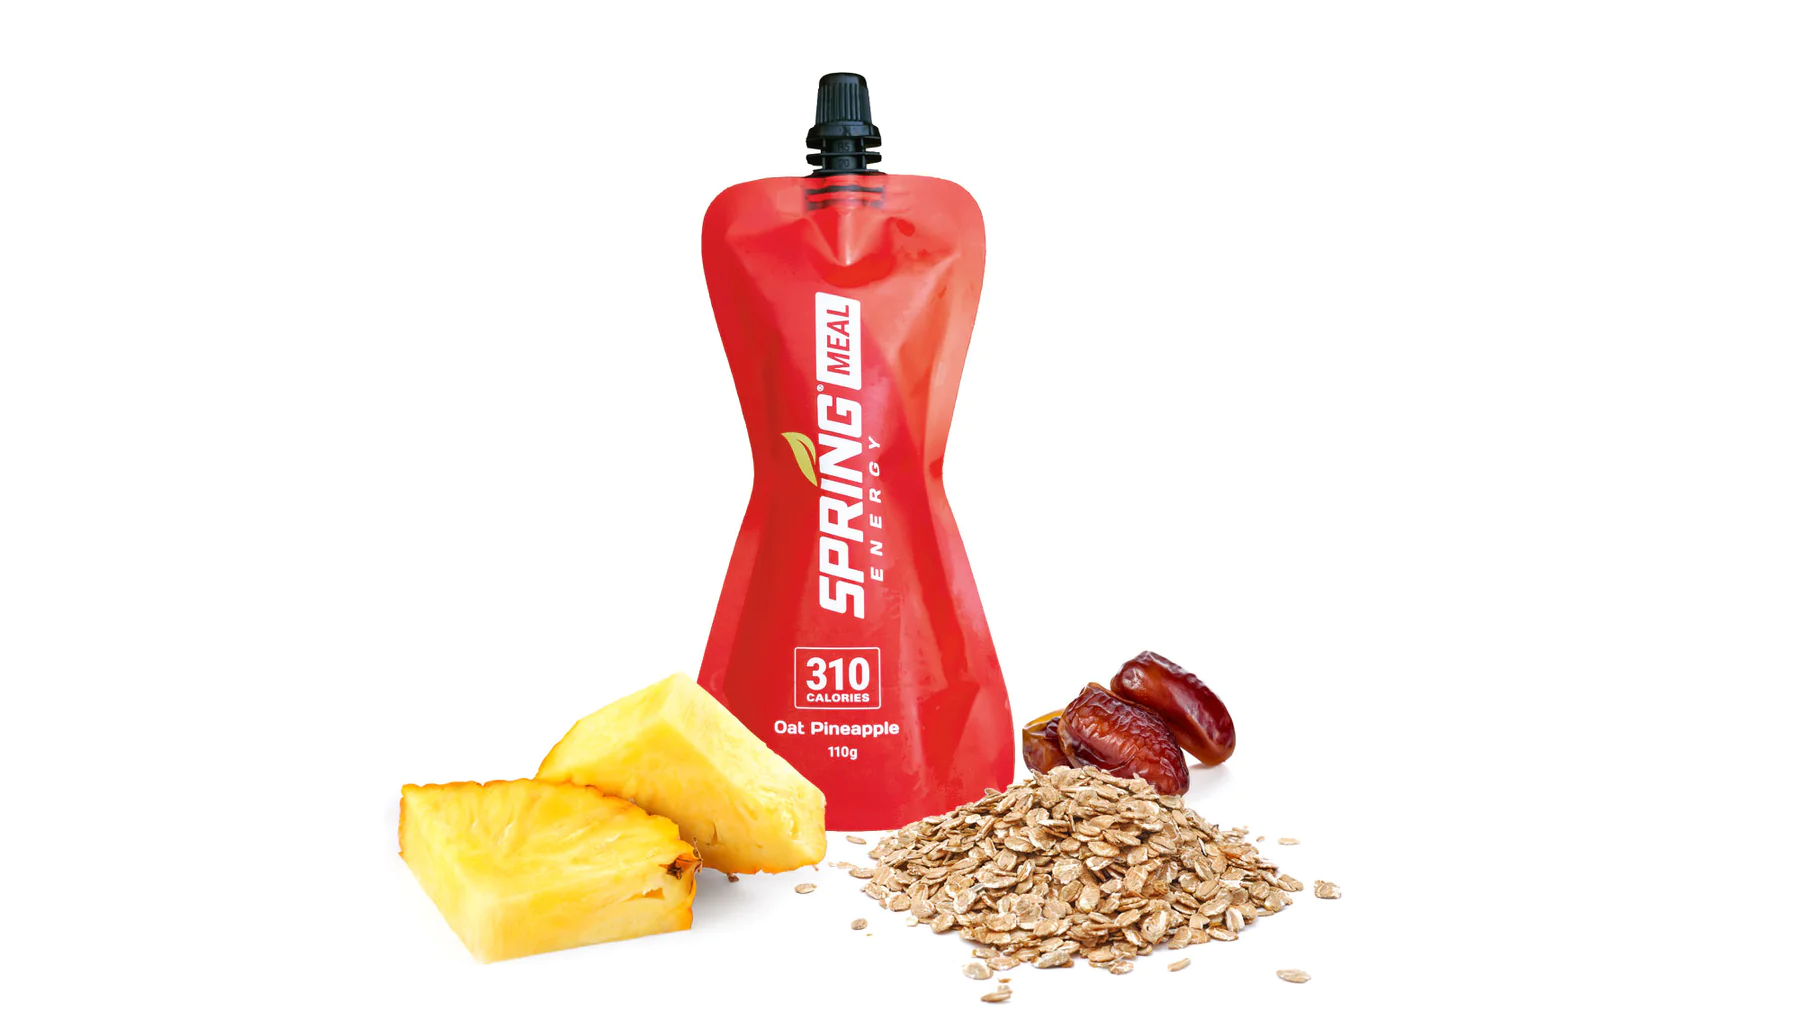 Spring Energy Oat Pineapple (WOLF PACK) - Endurance Meal for Athletes - 310 Kcal